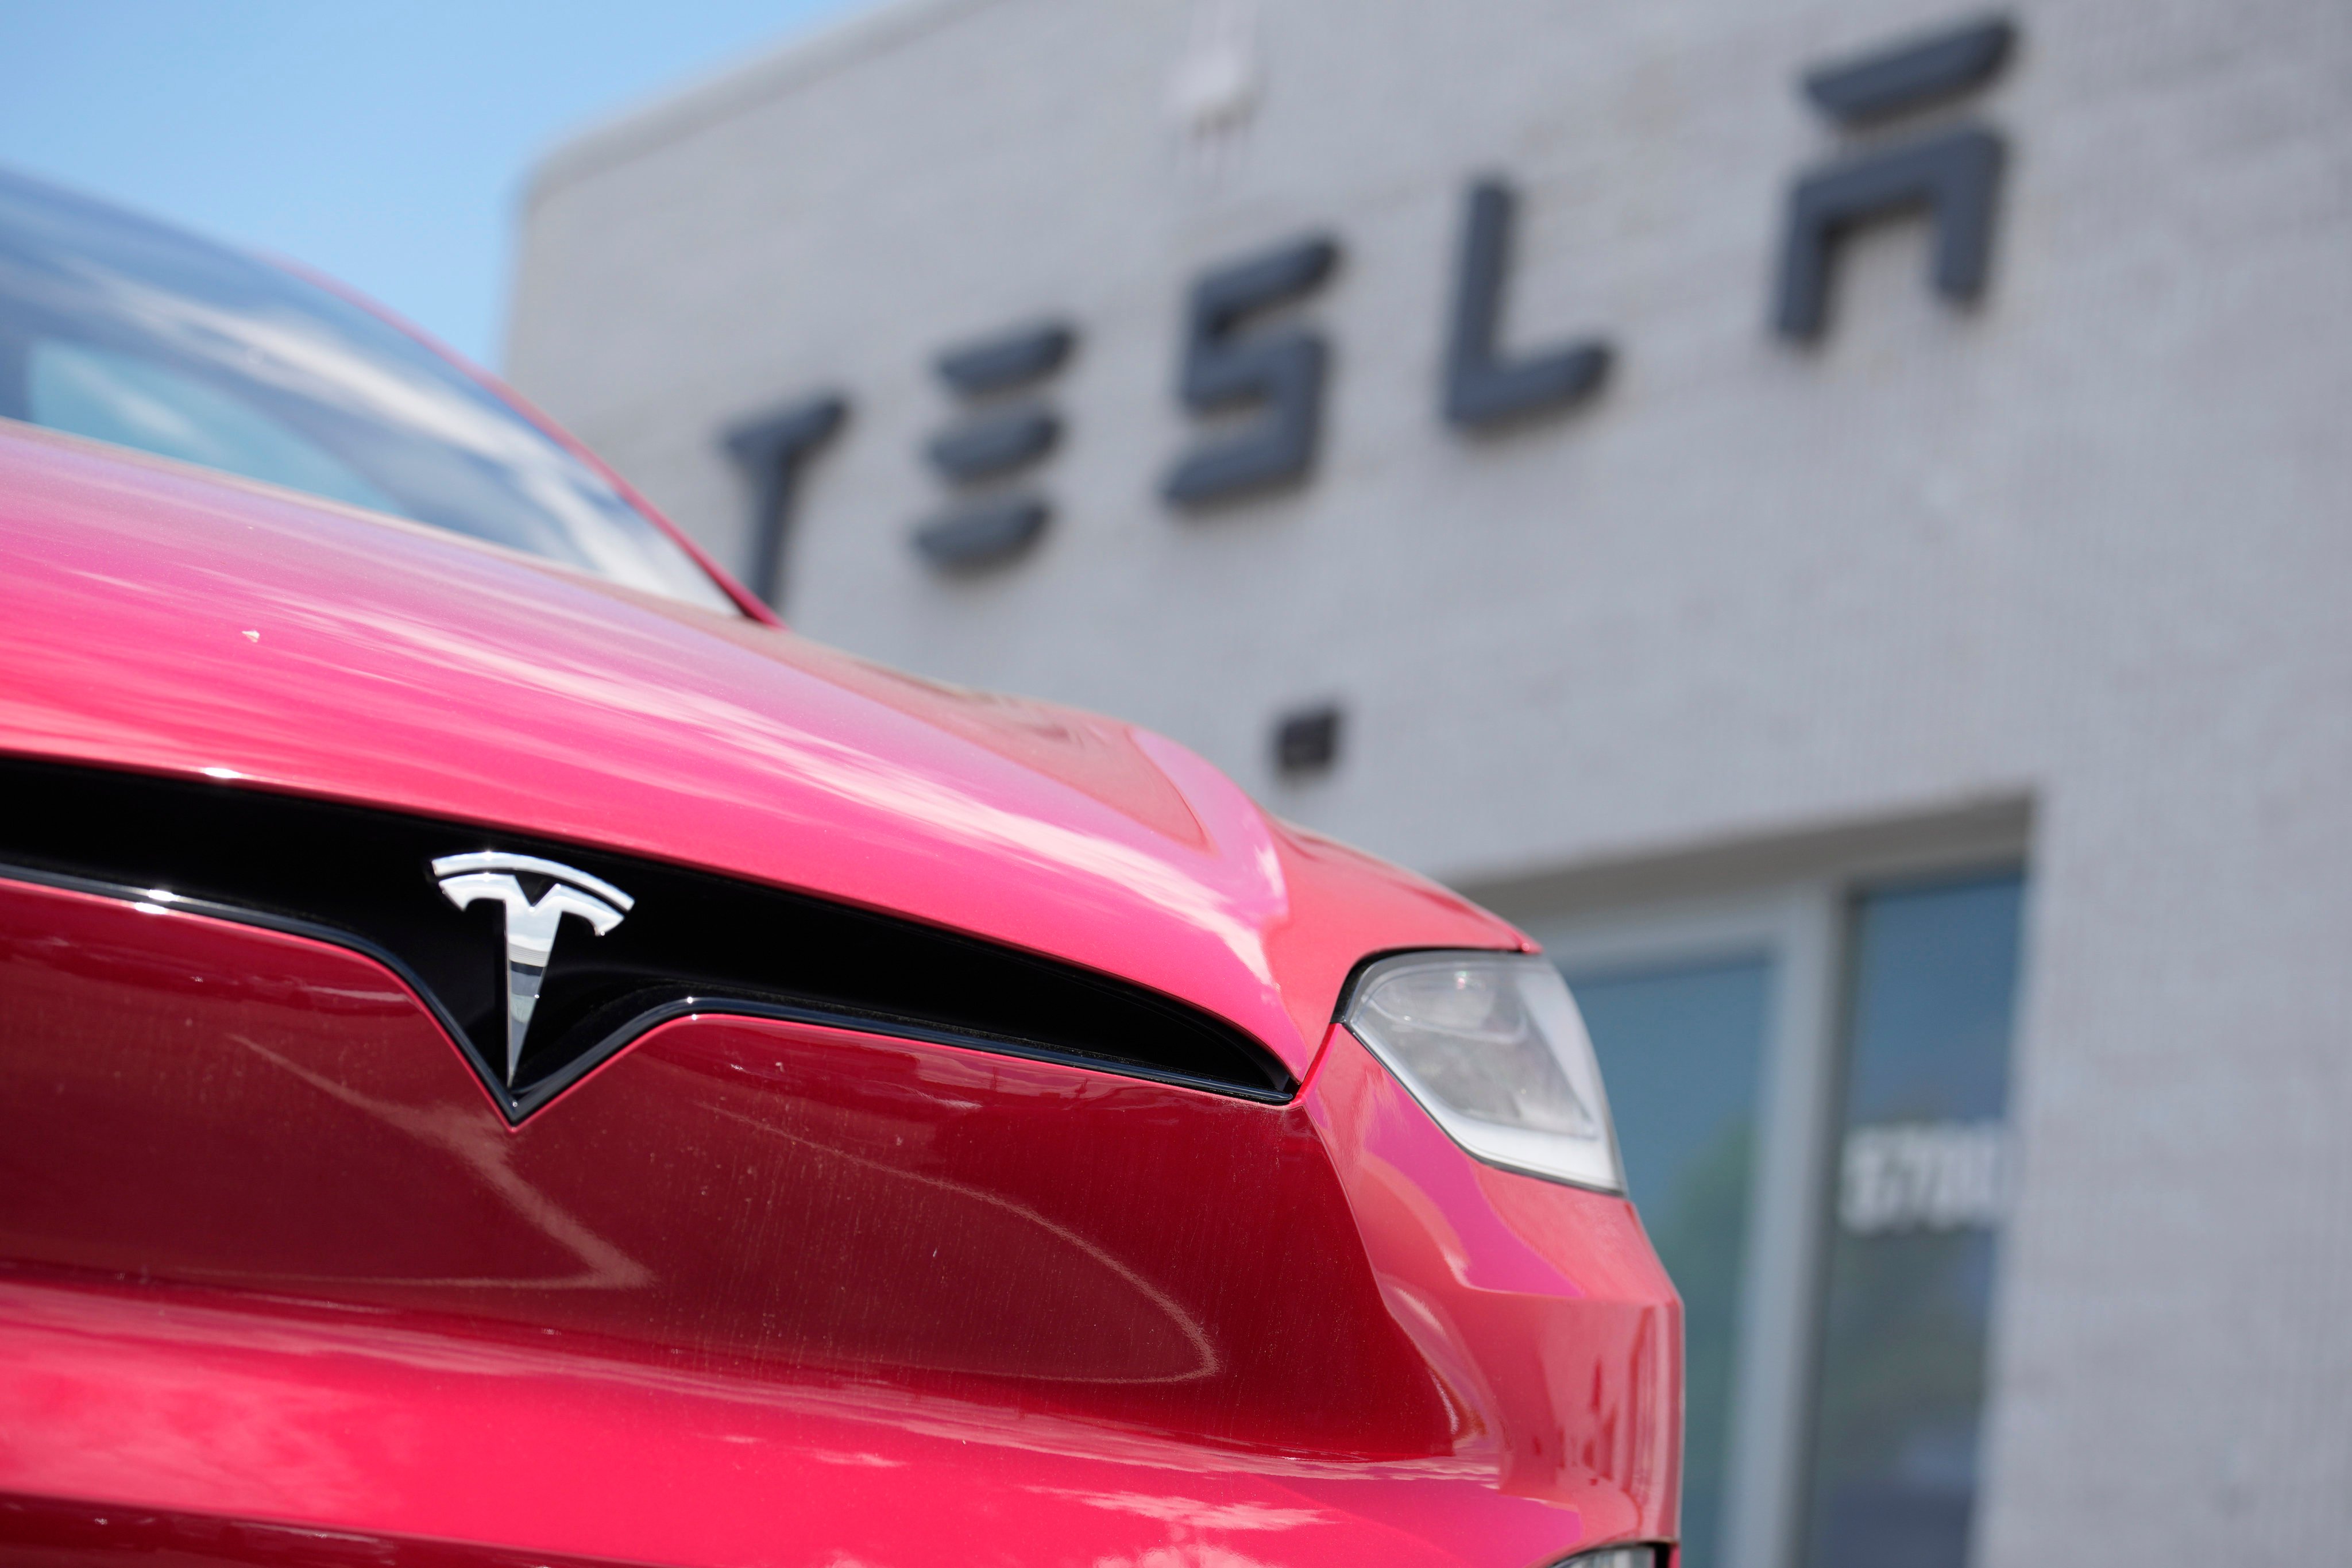 Tesla has cut the prices of its cars in the US and China amid falling sales. Photo: AP Photo